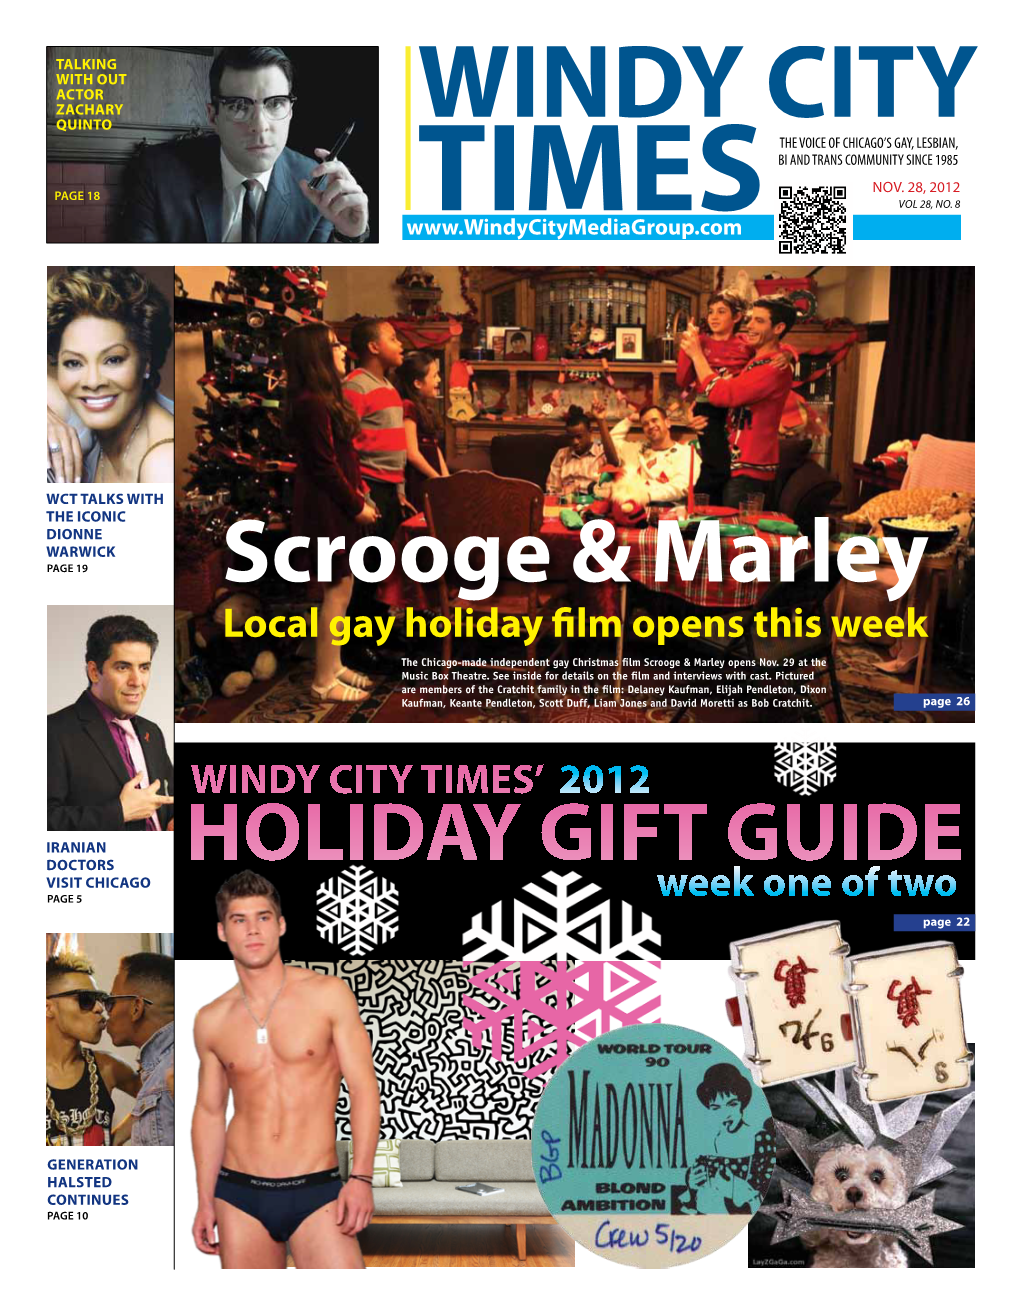 HOLIDAY GIFT GUIDE VISIT CHICAGO Page 5 Week One of Two Page 22